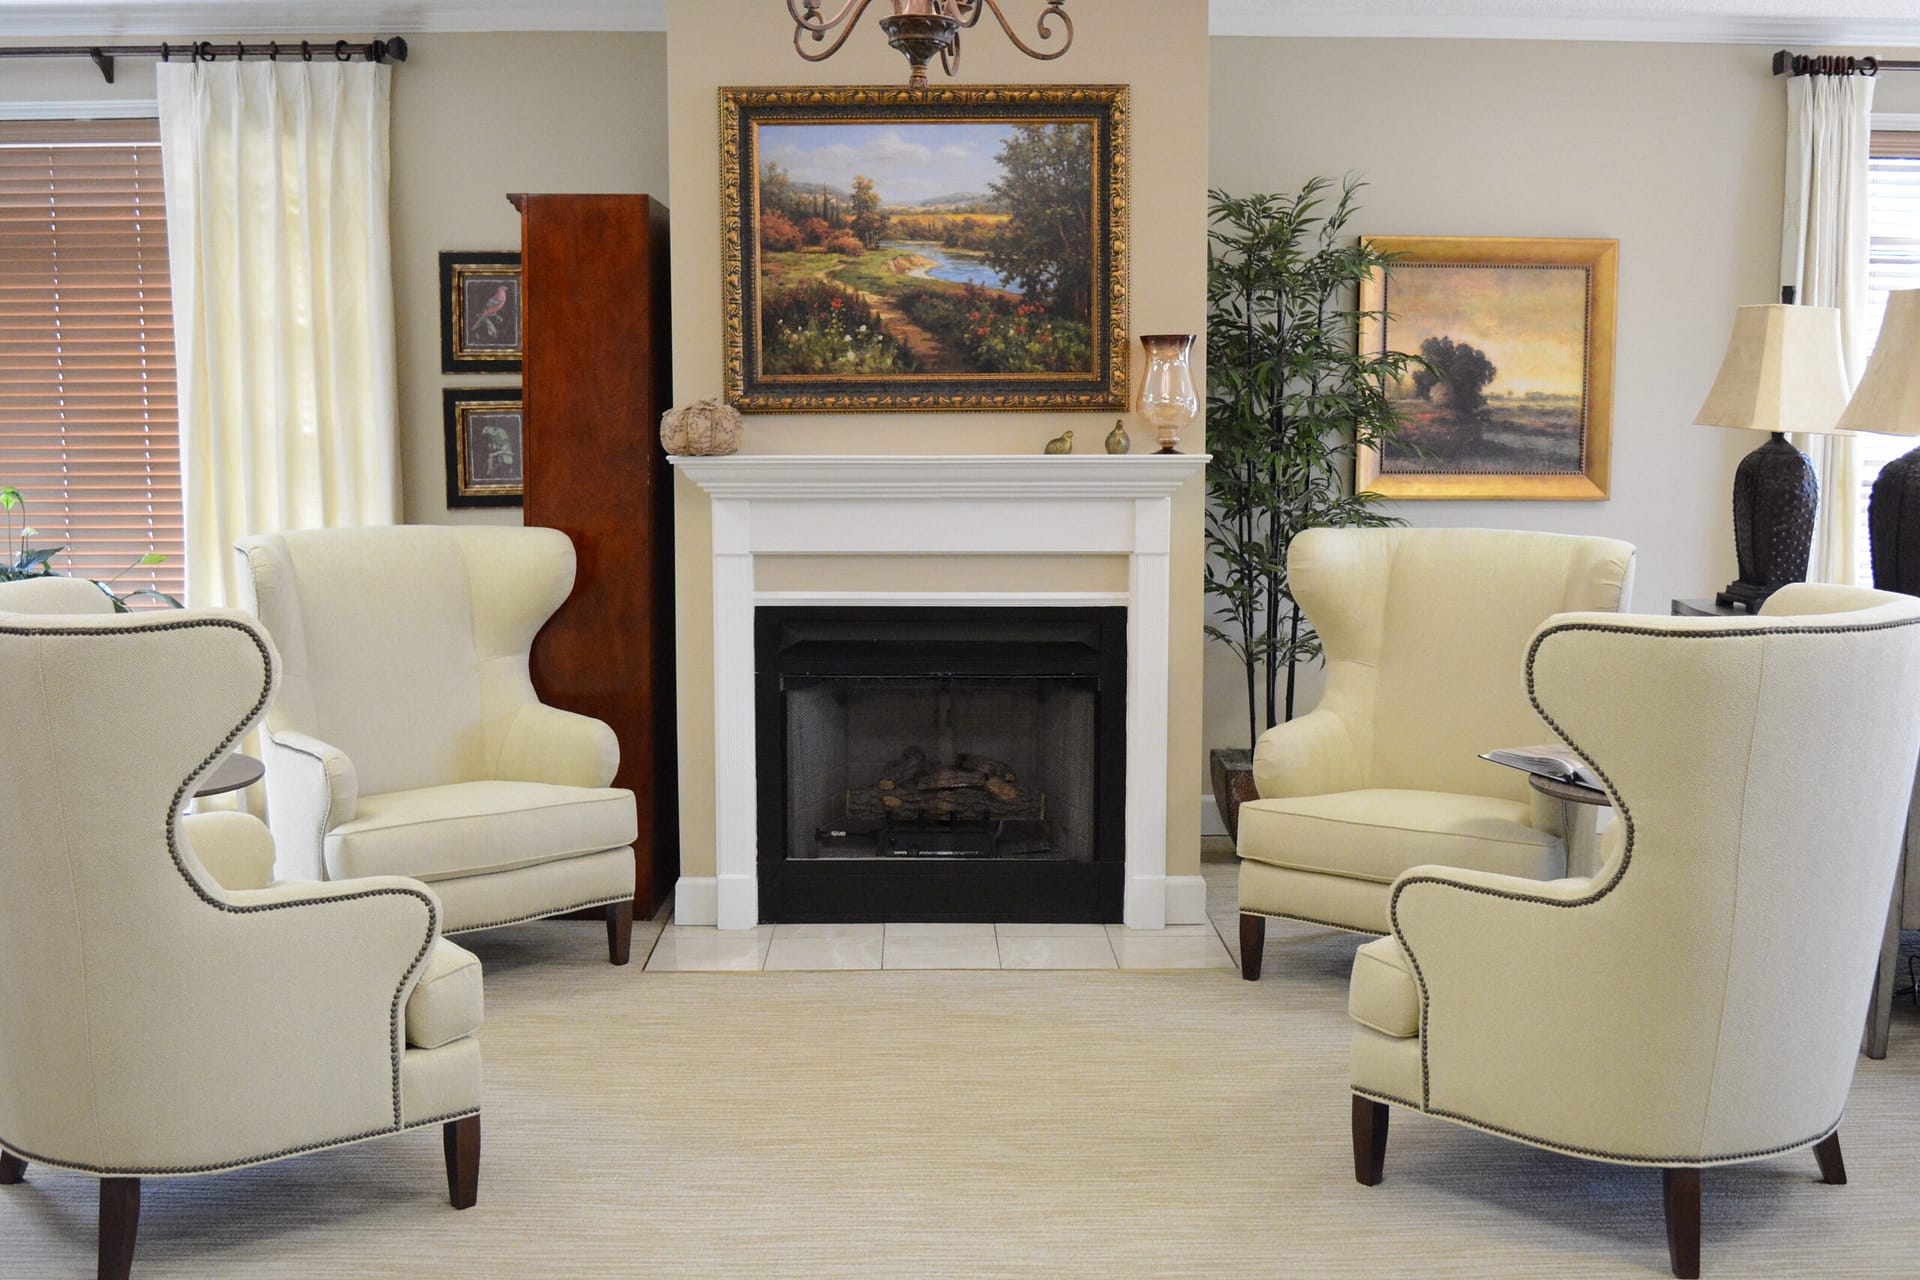 Morning Pointe Senior Living Tuscaloosa Living Area with Fireplace